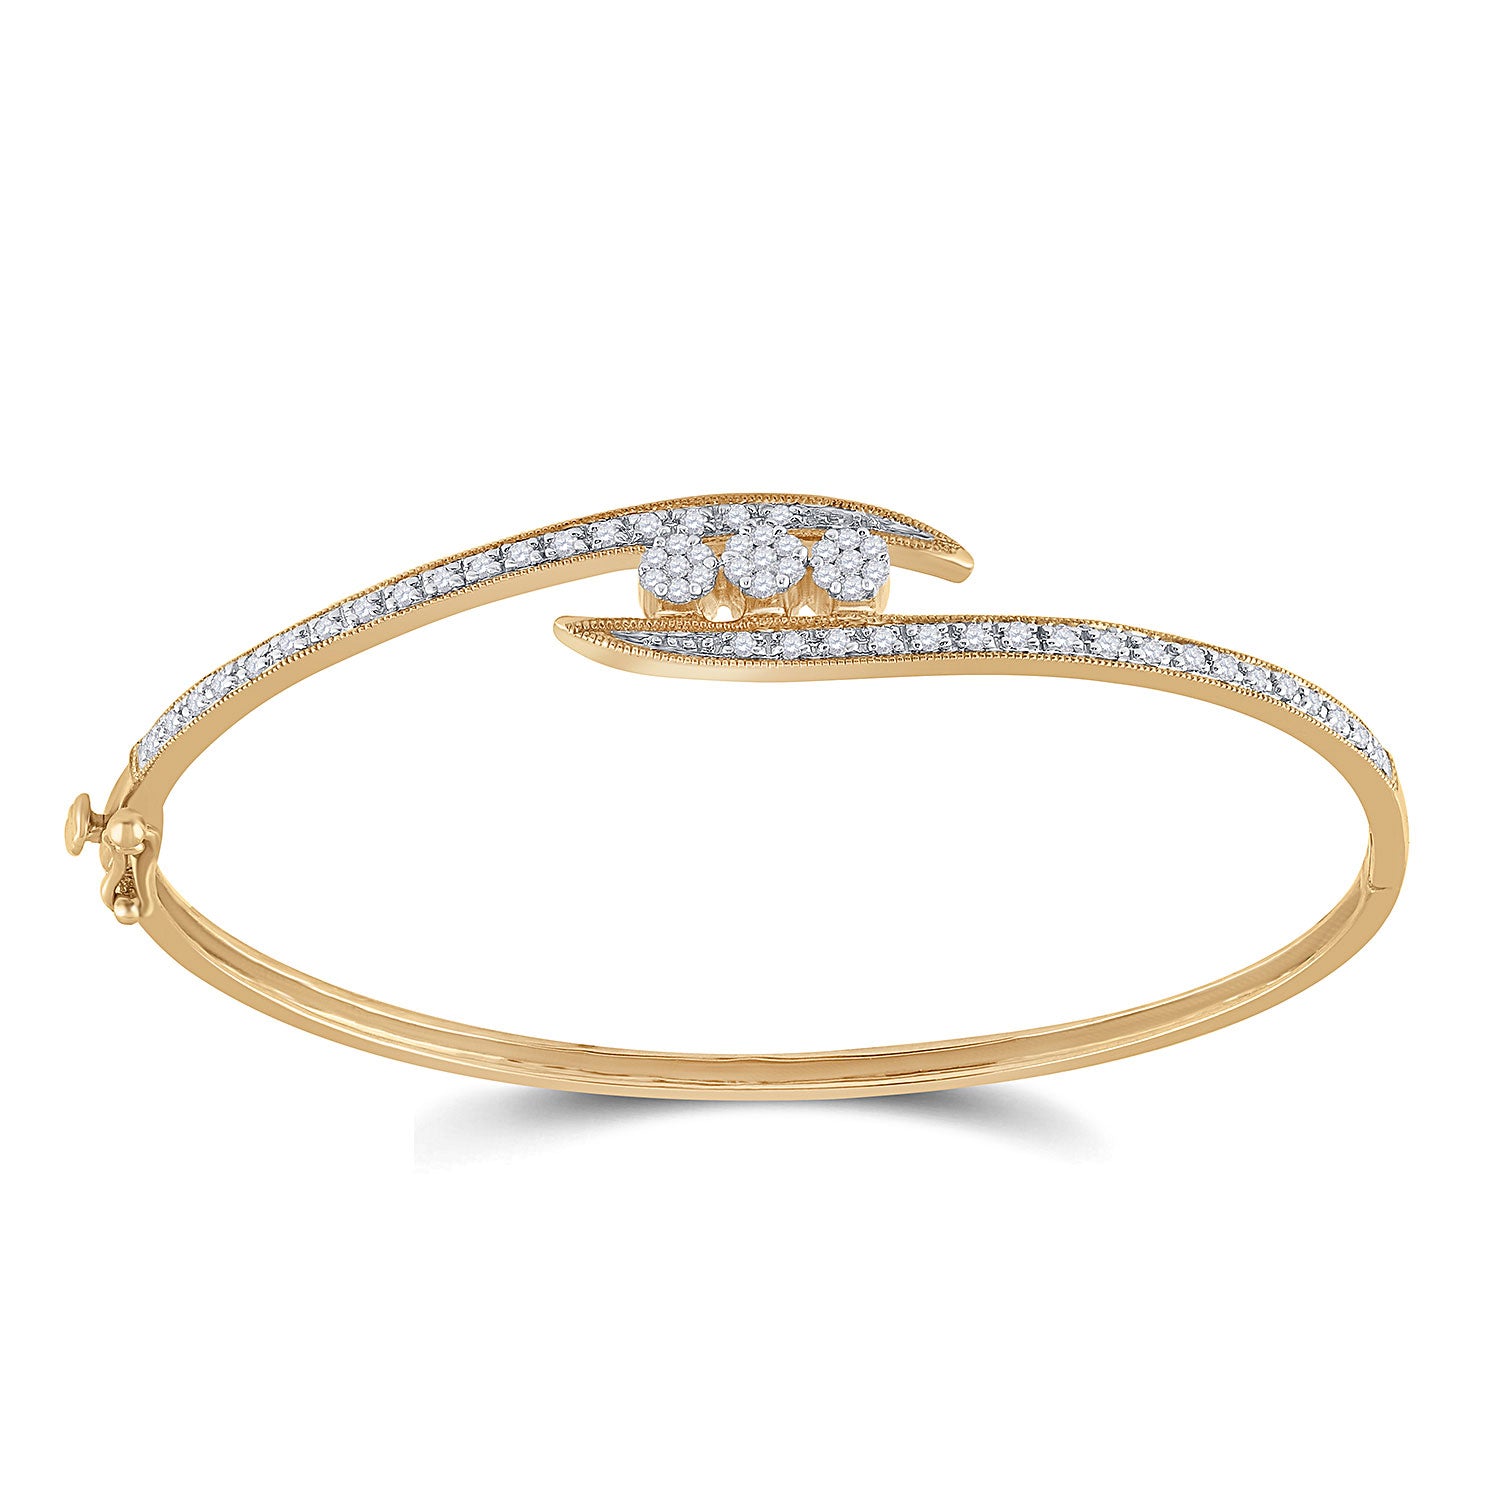 Twist Bangle Bracelet in 14kt Yellow Gold – Day's Jewelers